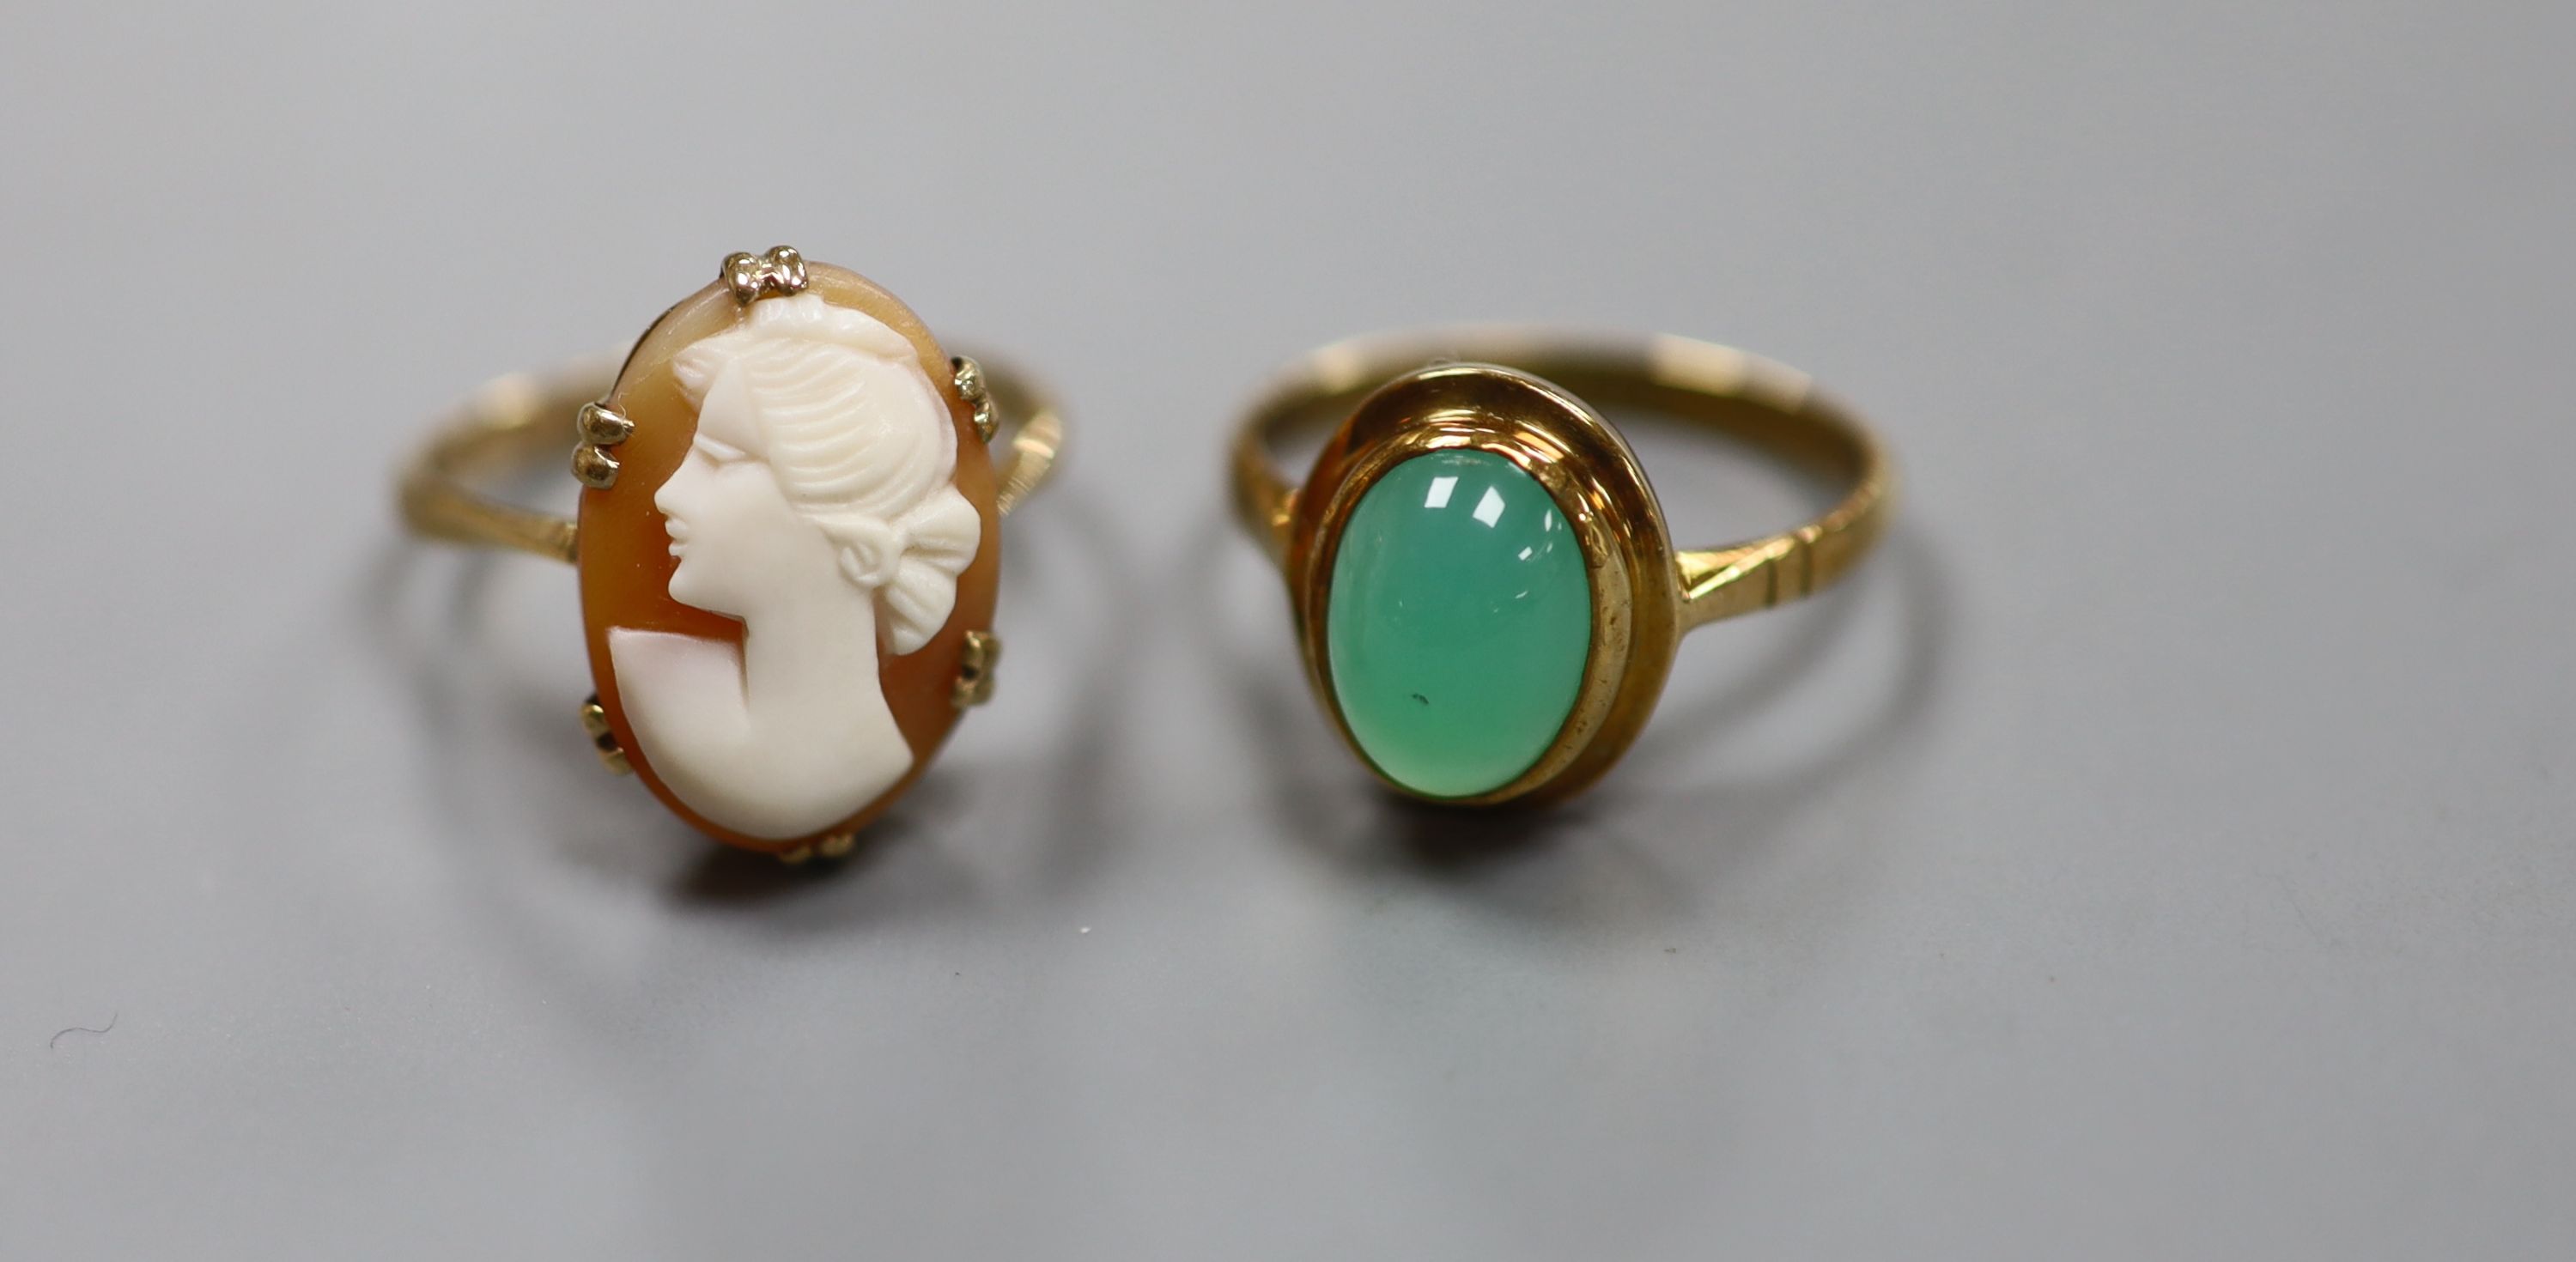 A 9ct and cameo shell ring, a 9ct and chrysoprase ring, a bar brooch, pendant and gilt metal pendant watch on a 9ct chain